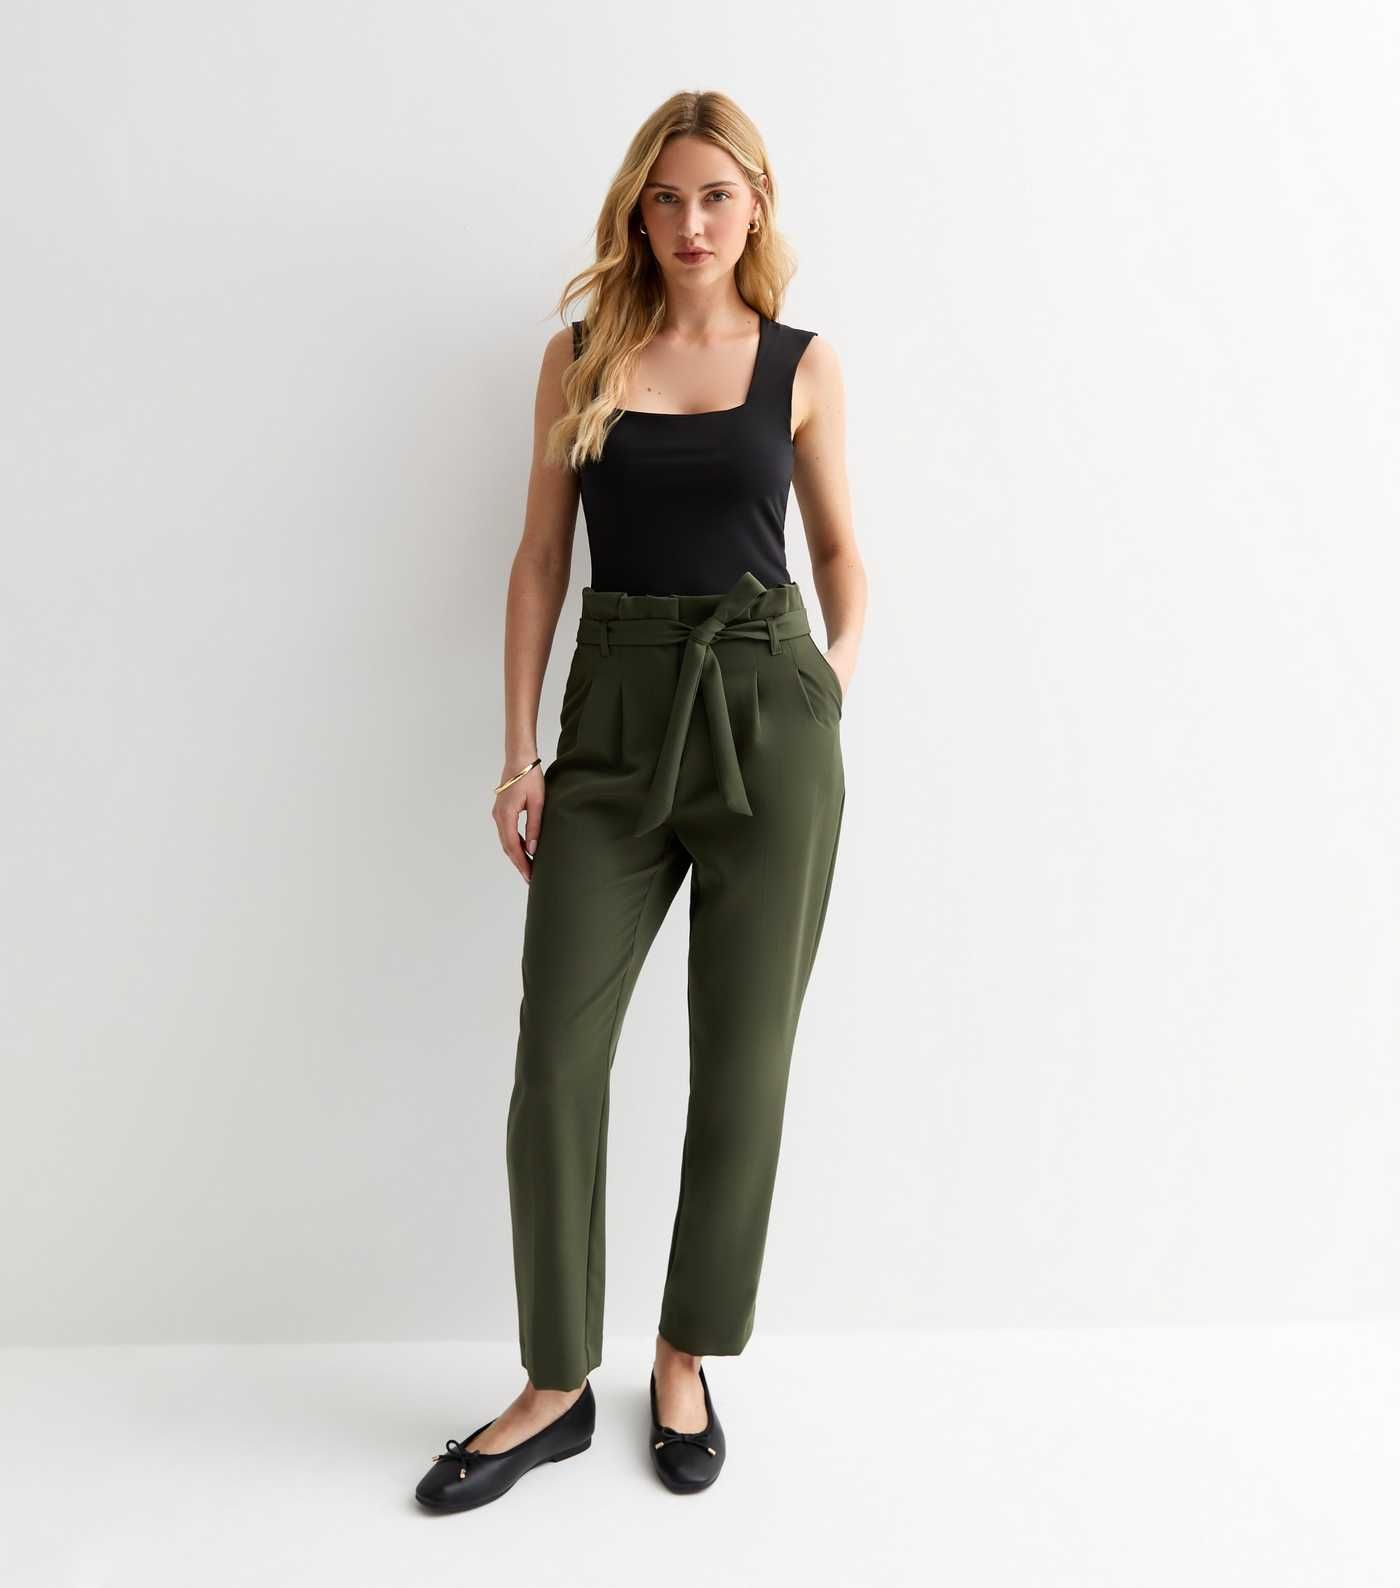 Khaki High Waist Paperbag Trousers
						
						Add to Saved Items
						Remove from Saved Items | New Look (UK)